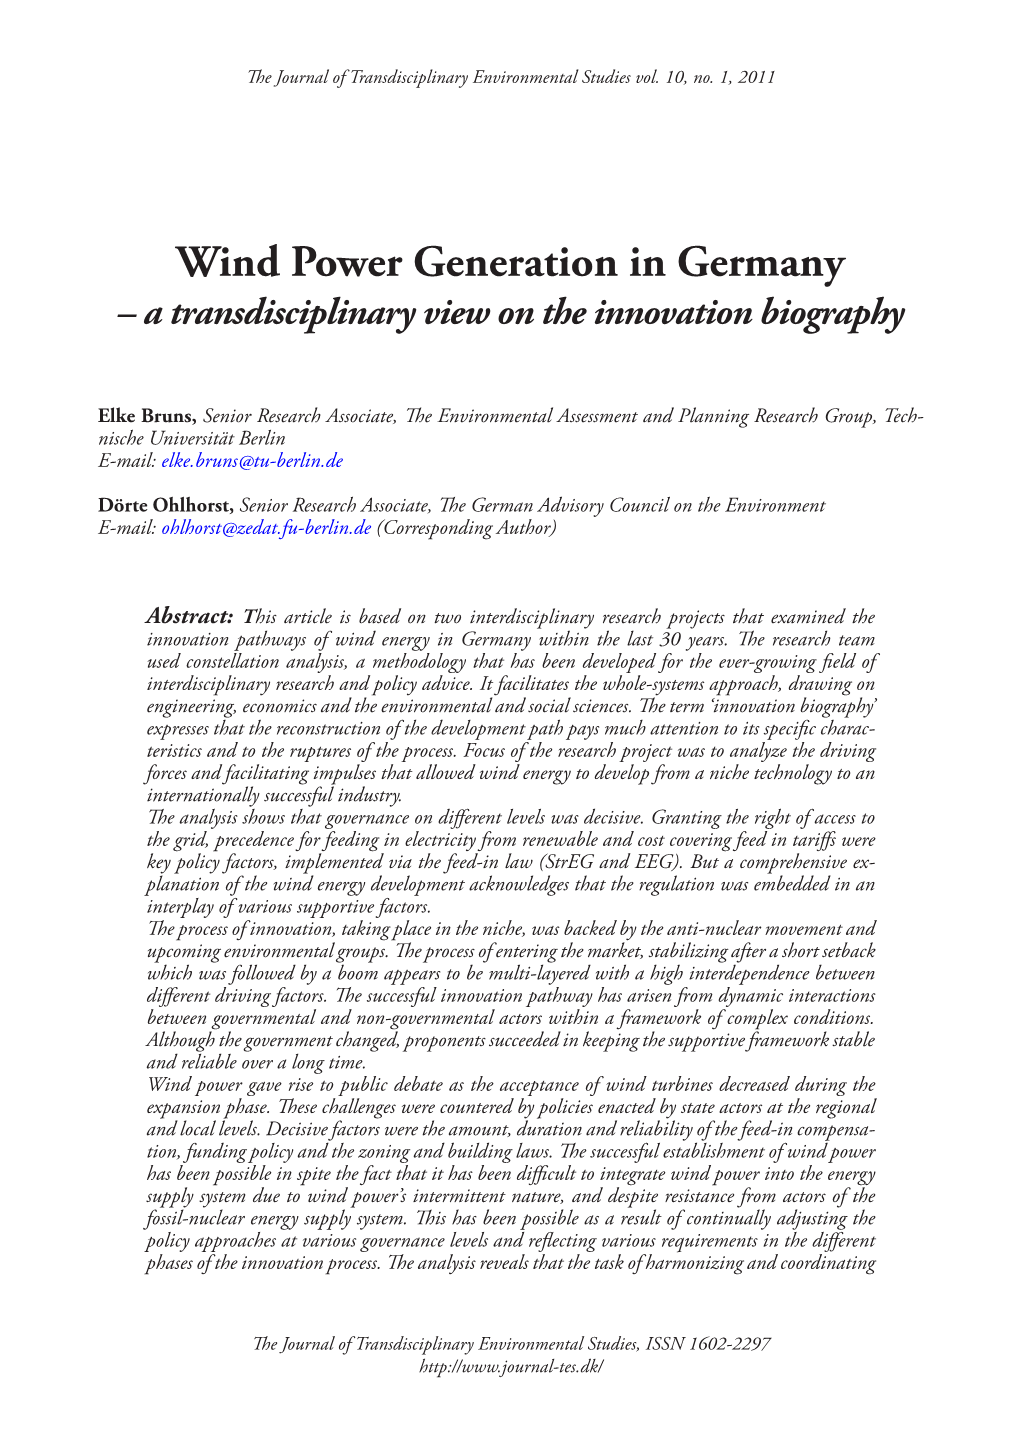 Wind Power Generation in Germany – a Transdisciplinary View on the Innovation Biography